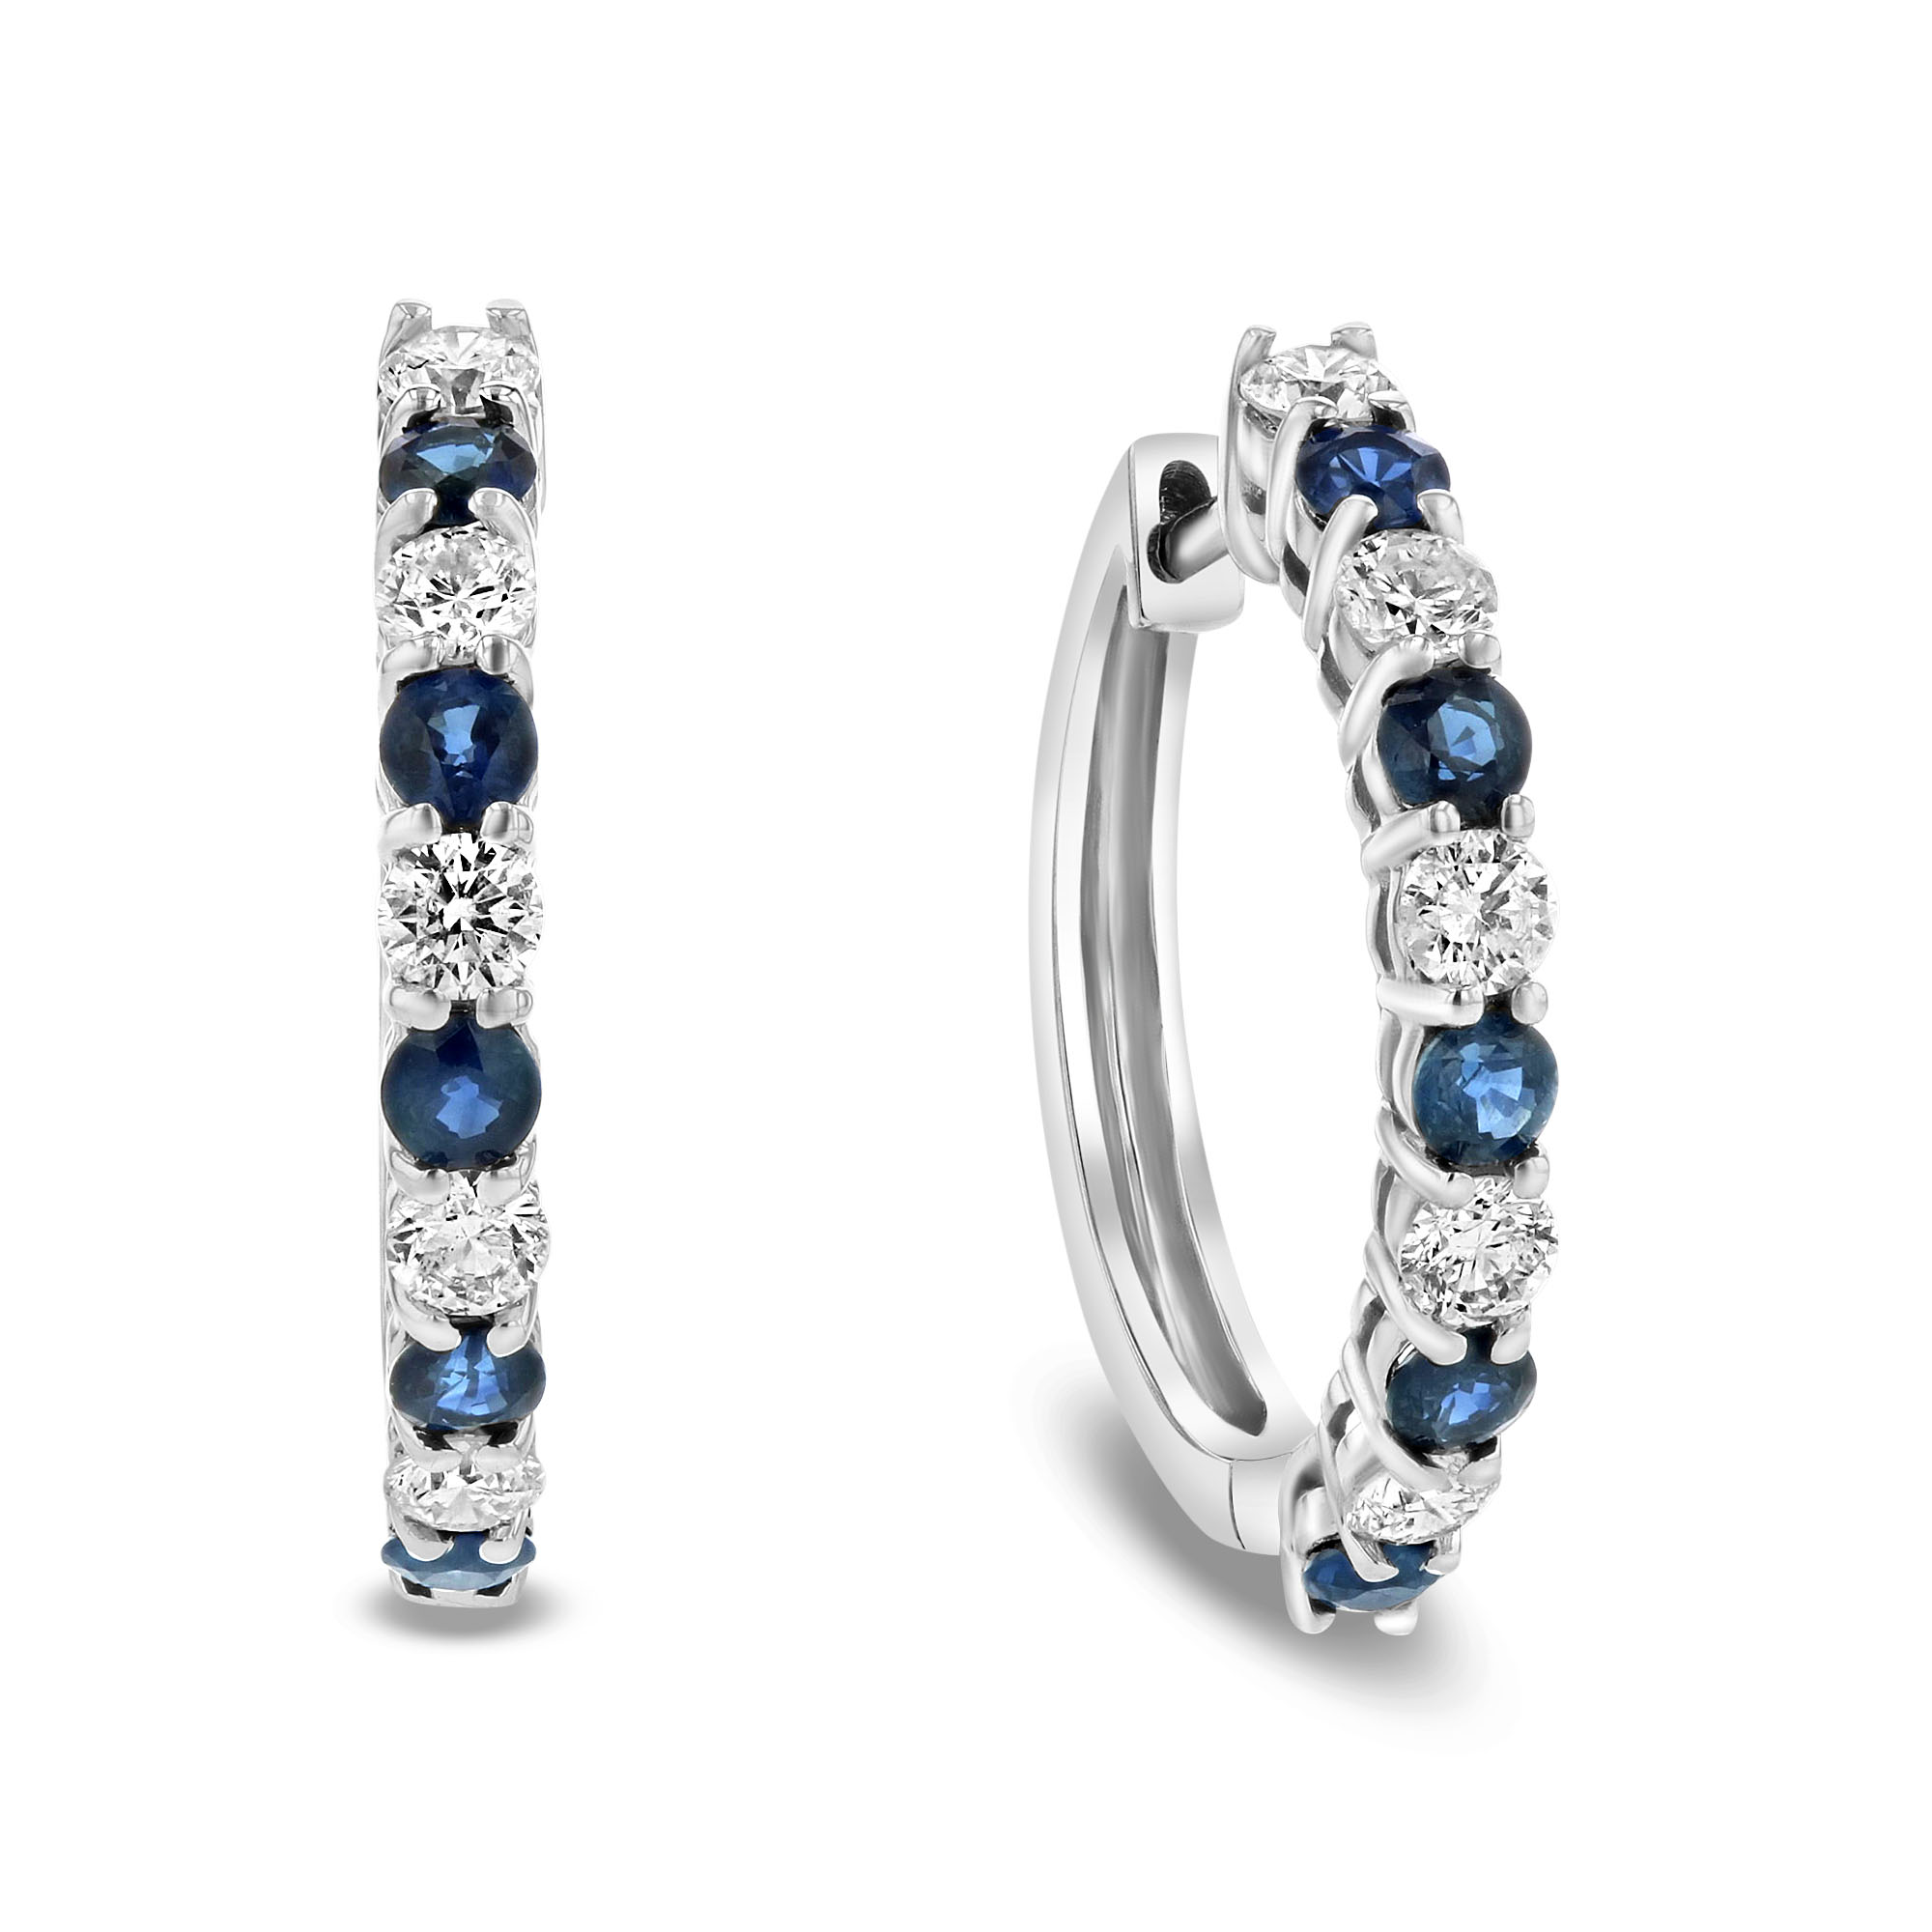 View 1.35ctw Diamond and Sapphire Hoop Earrings in 14k White Gold